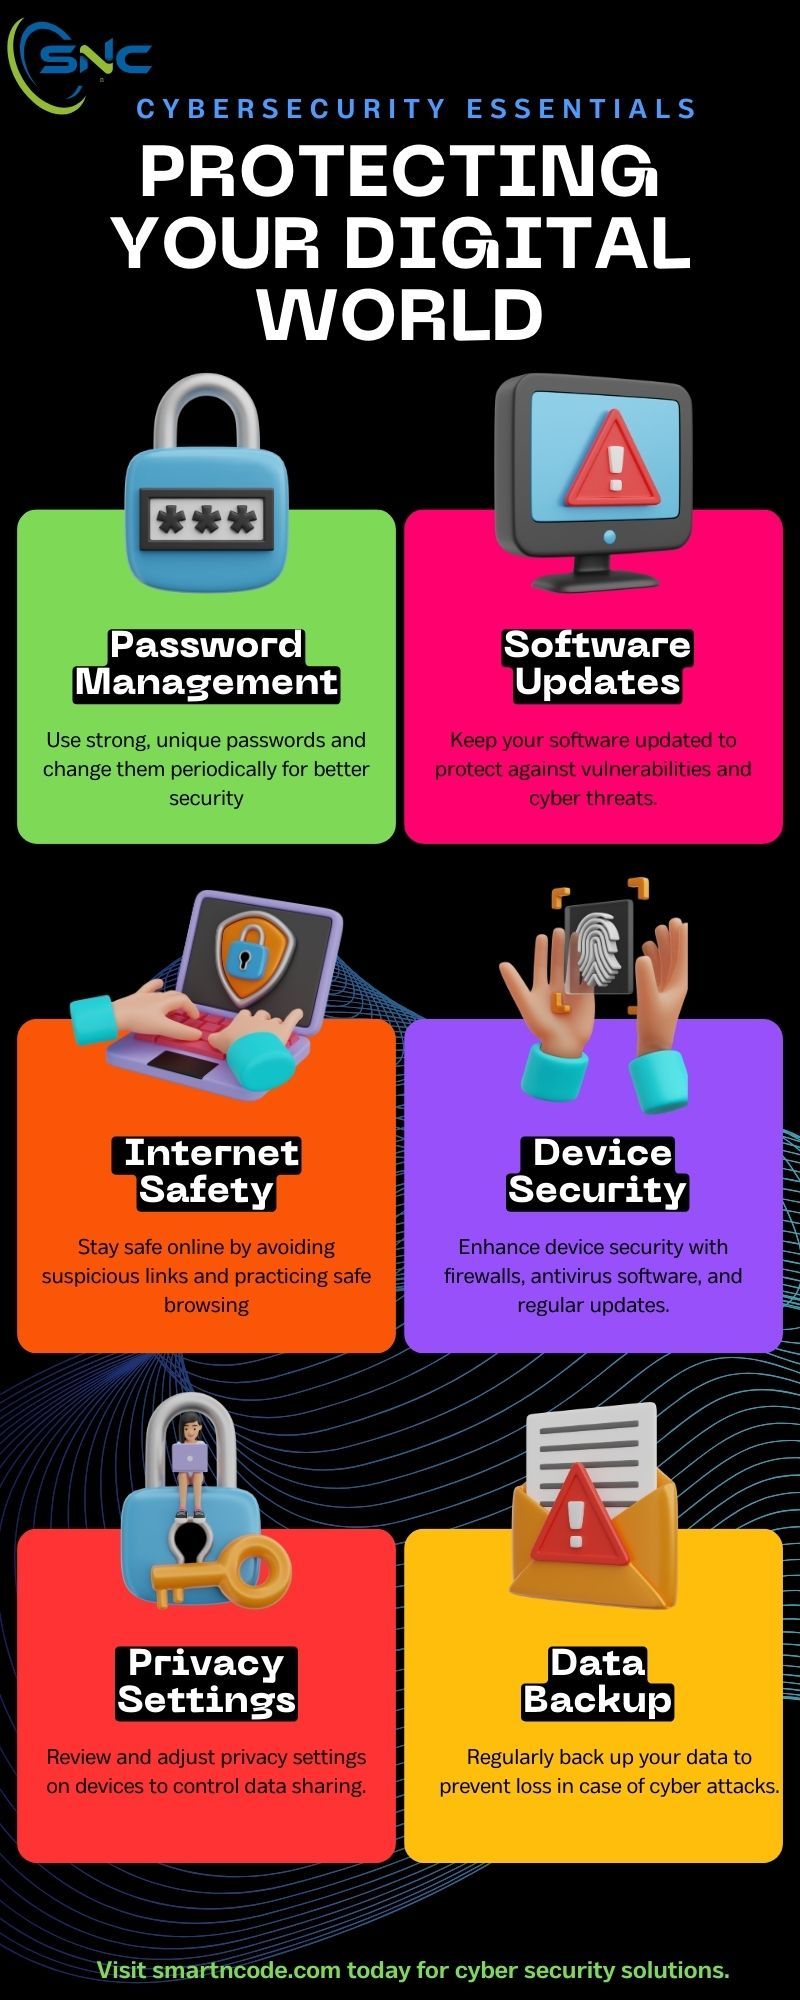 Benefits of Taking Cybersecurity Courses Online